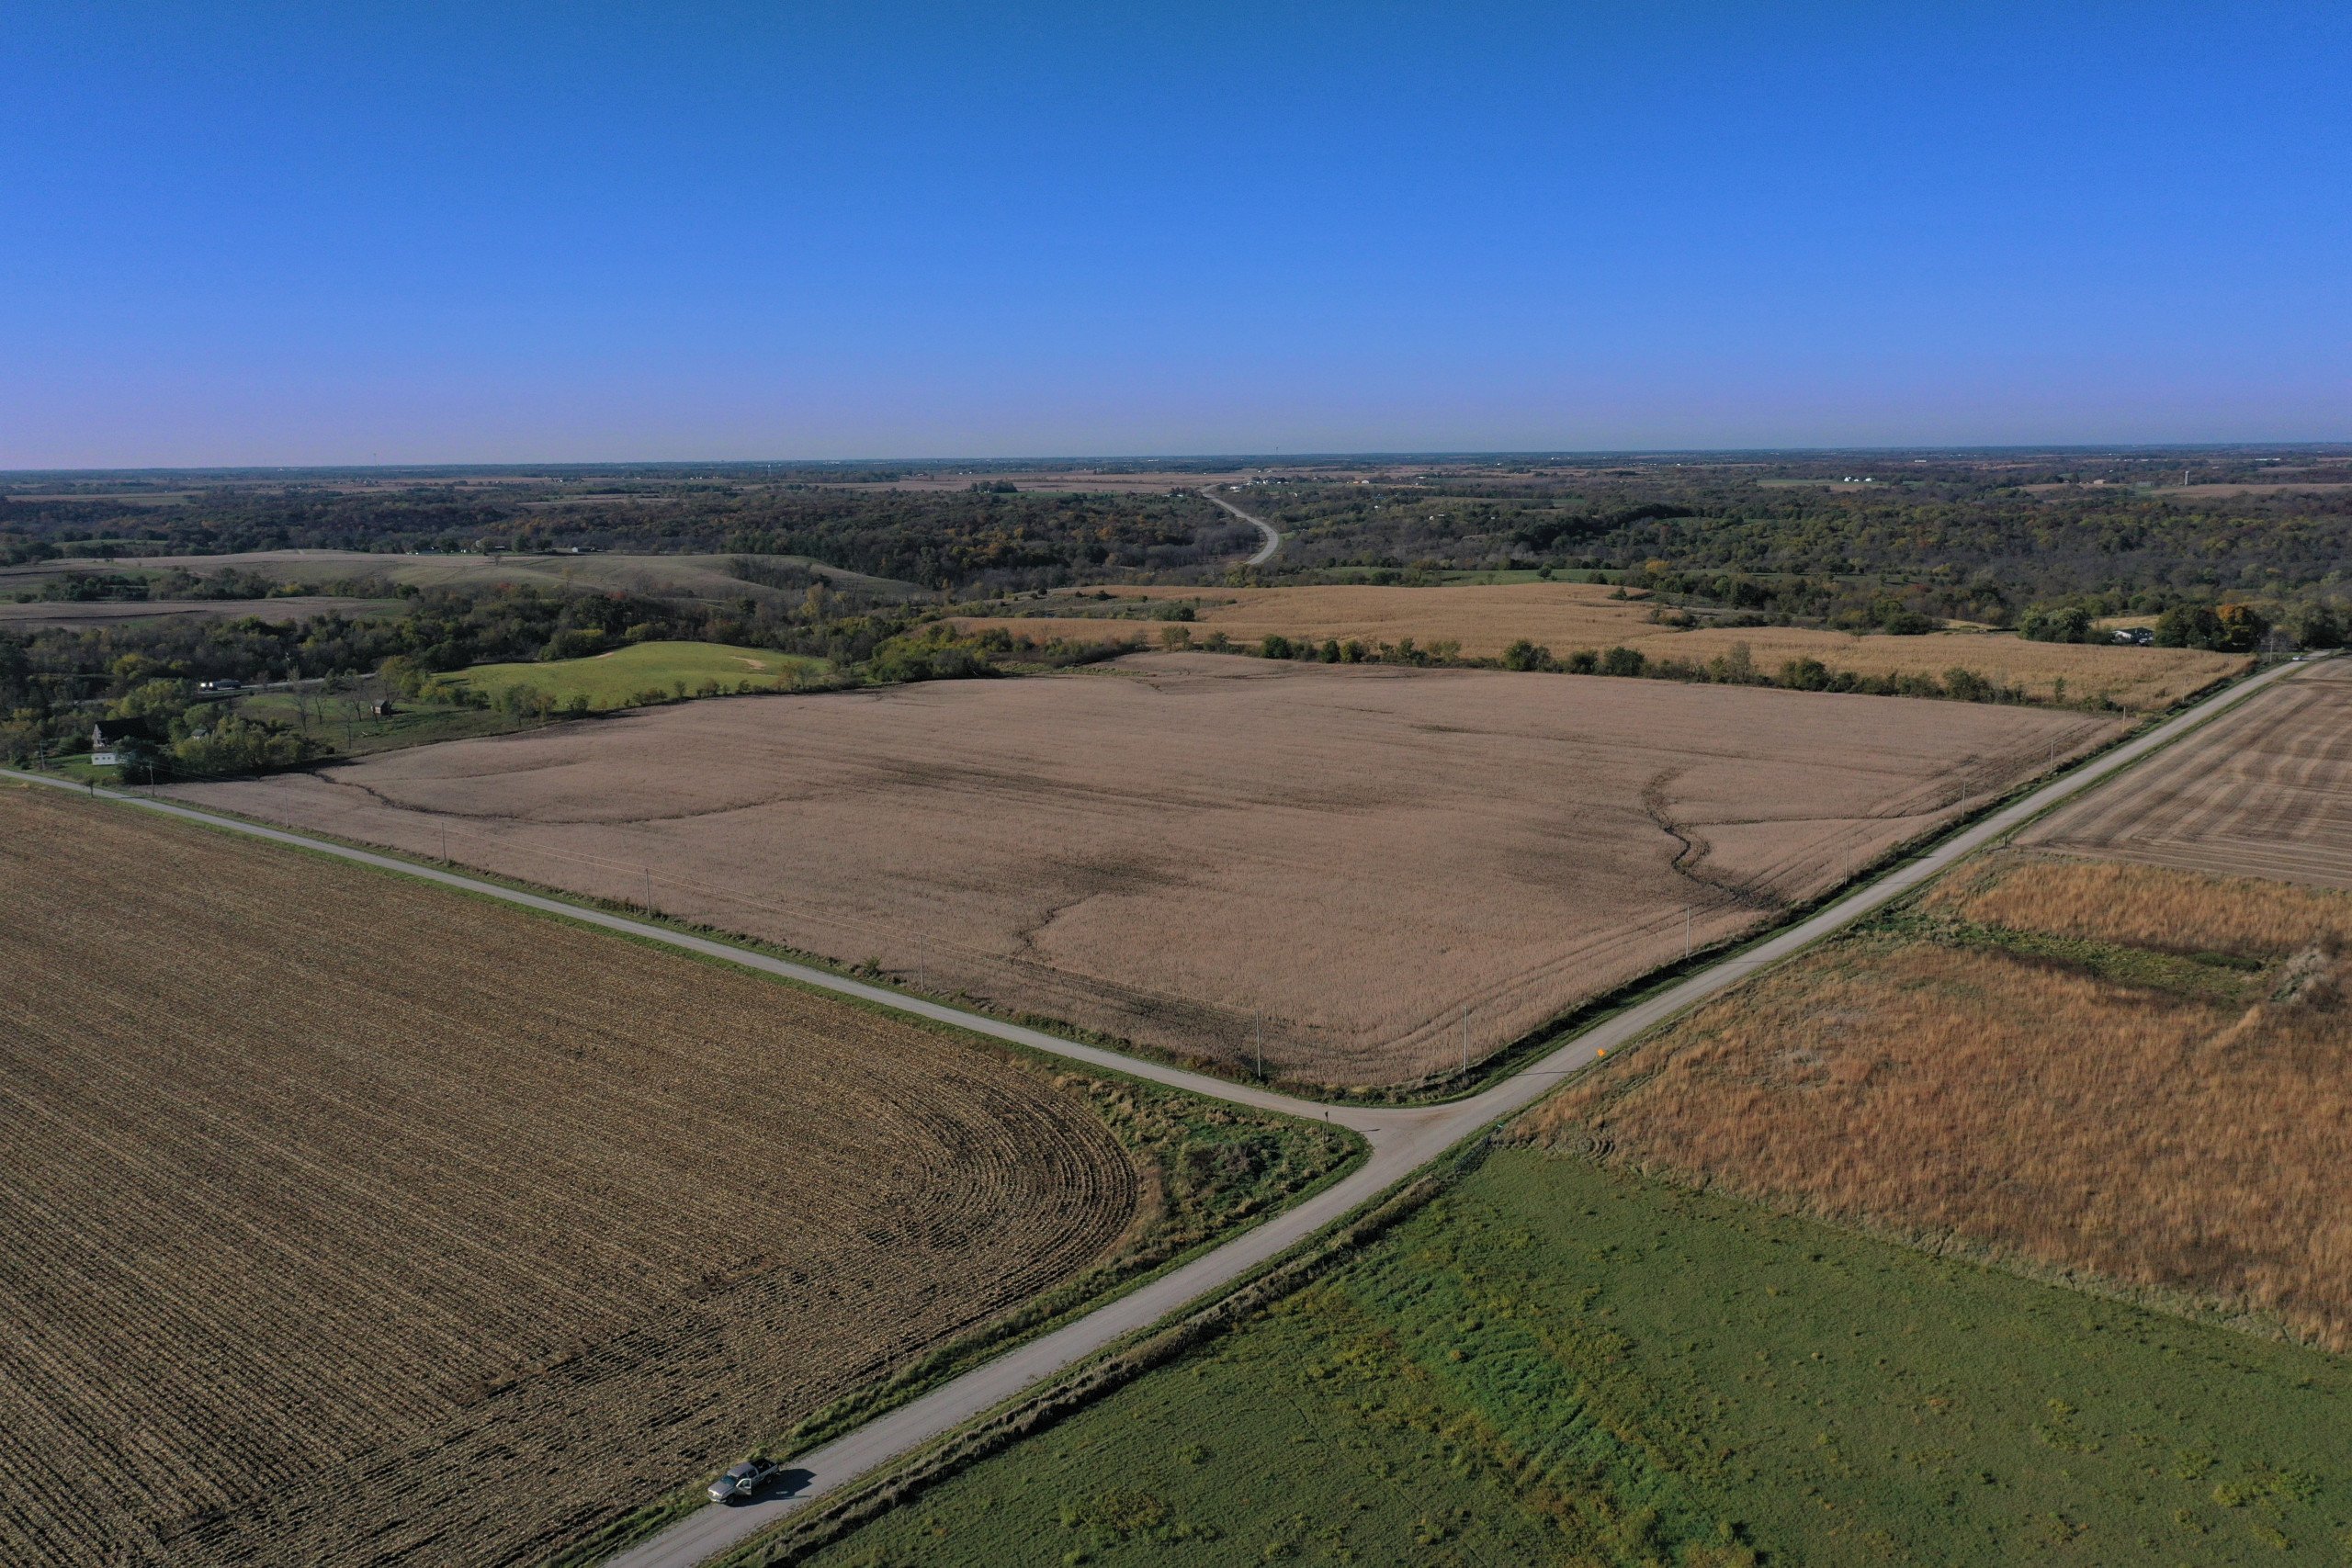 5-560th-st-and-280th-ave-williamson-50272-DJI_0737-0.jpg